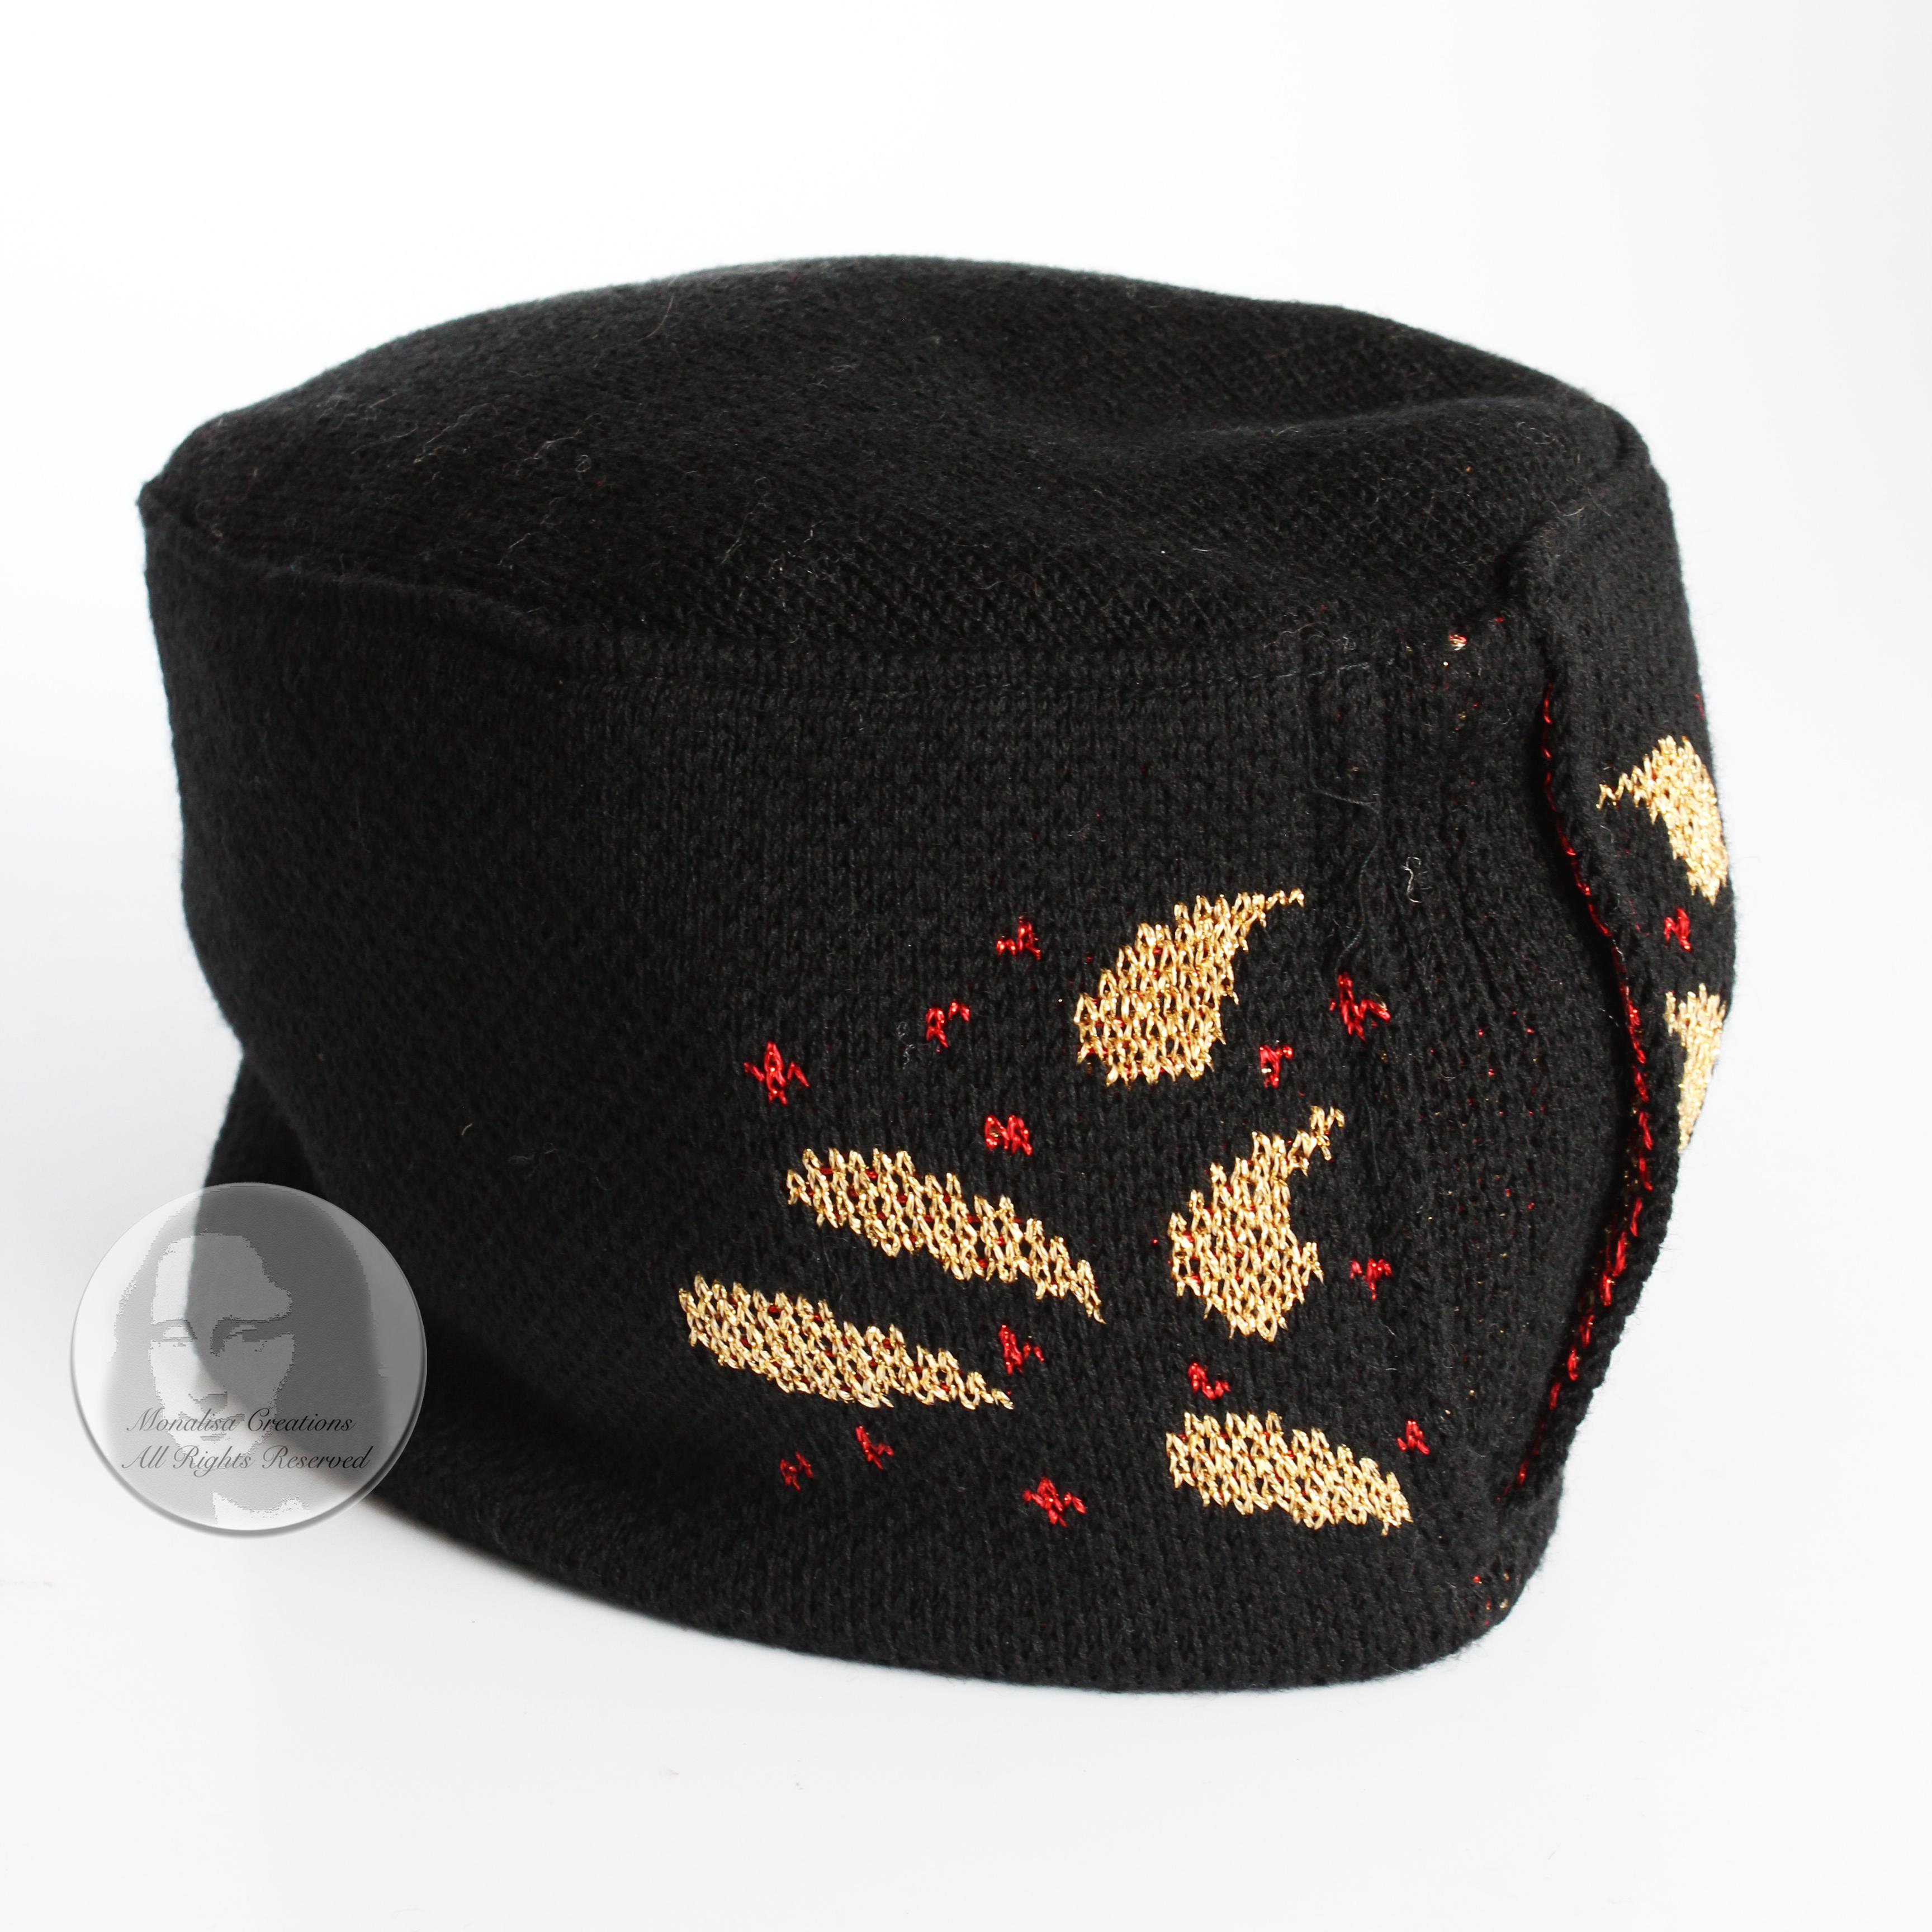 Preowned, vintage knit hat or cap, made by Yves Saint Laurent, most likely in the late 70s or early 80s.  Made from a wool/metallic blend knit, it's shaped Fez-style with an abstract gold and red metallic paisley design.  

A fabulous and